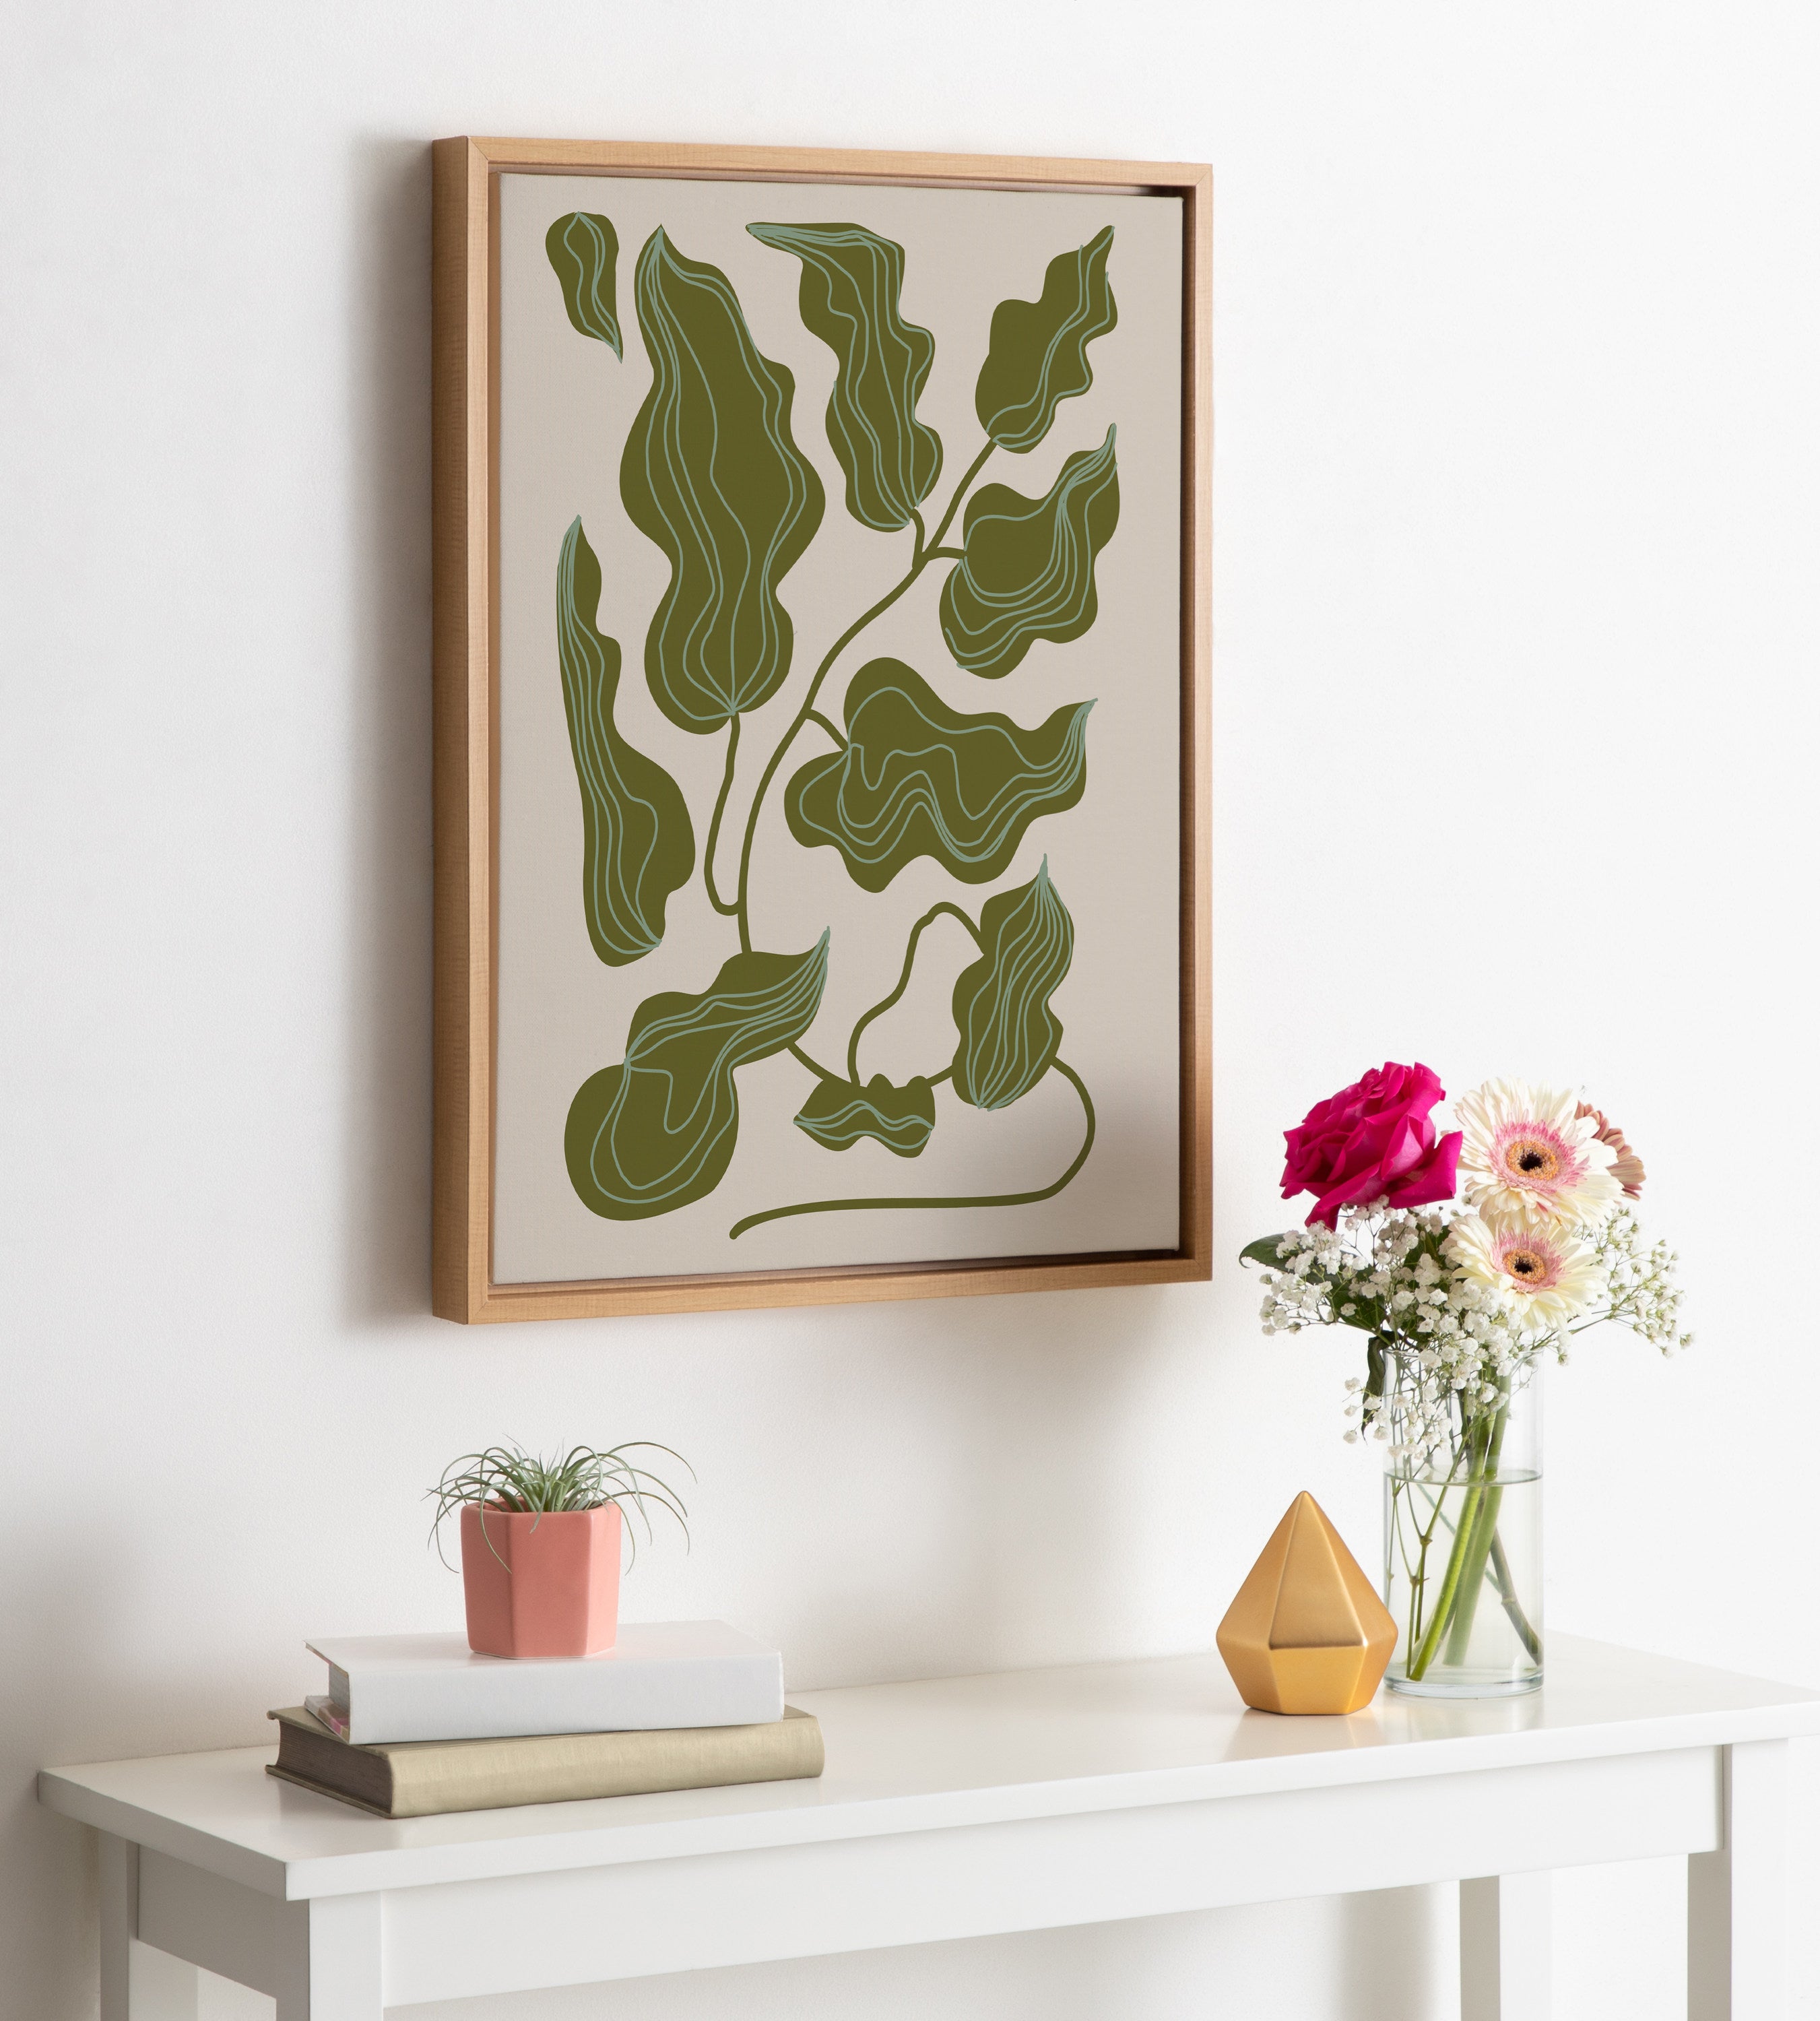 Sylvie Expressive Abstract House Plant Green Leaves Framed Canvas by The Creative Bunch Studio